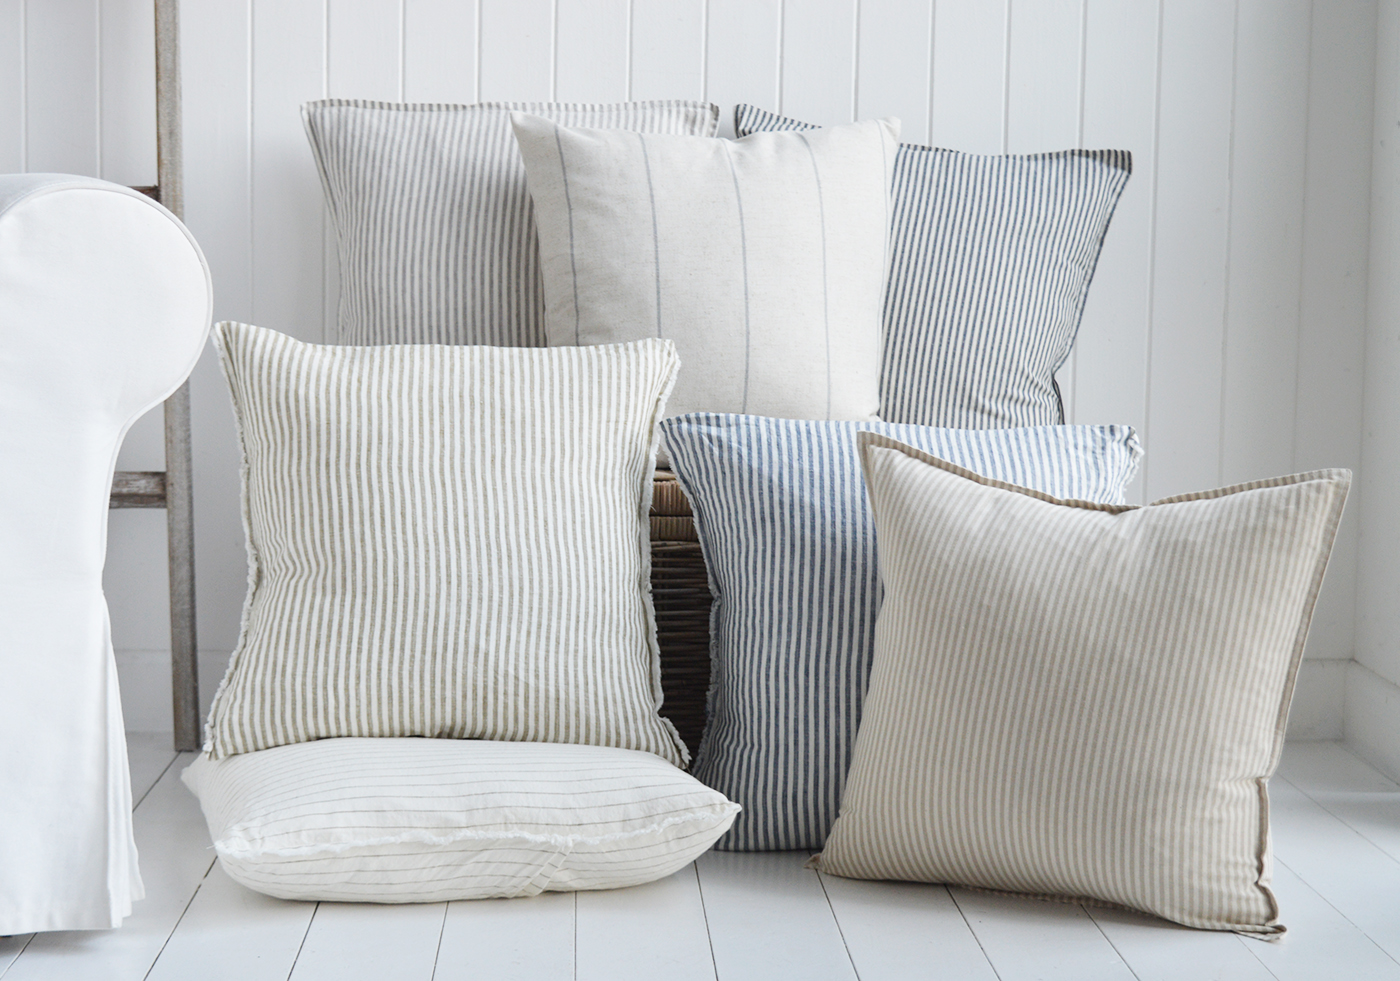 Rhode Island Striped Cushion Covers Linen Blends - New England, Hamptons and coastal cushions and interiors